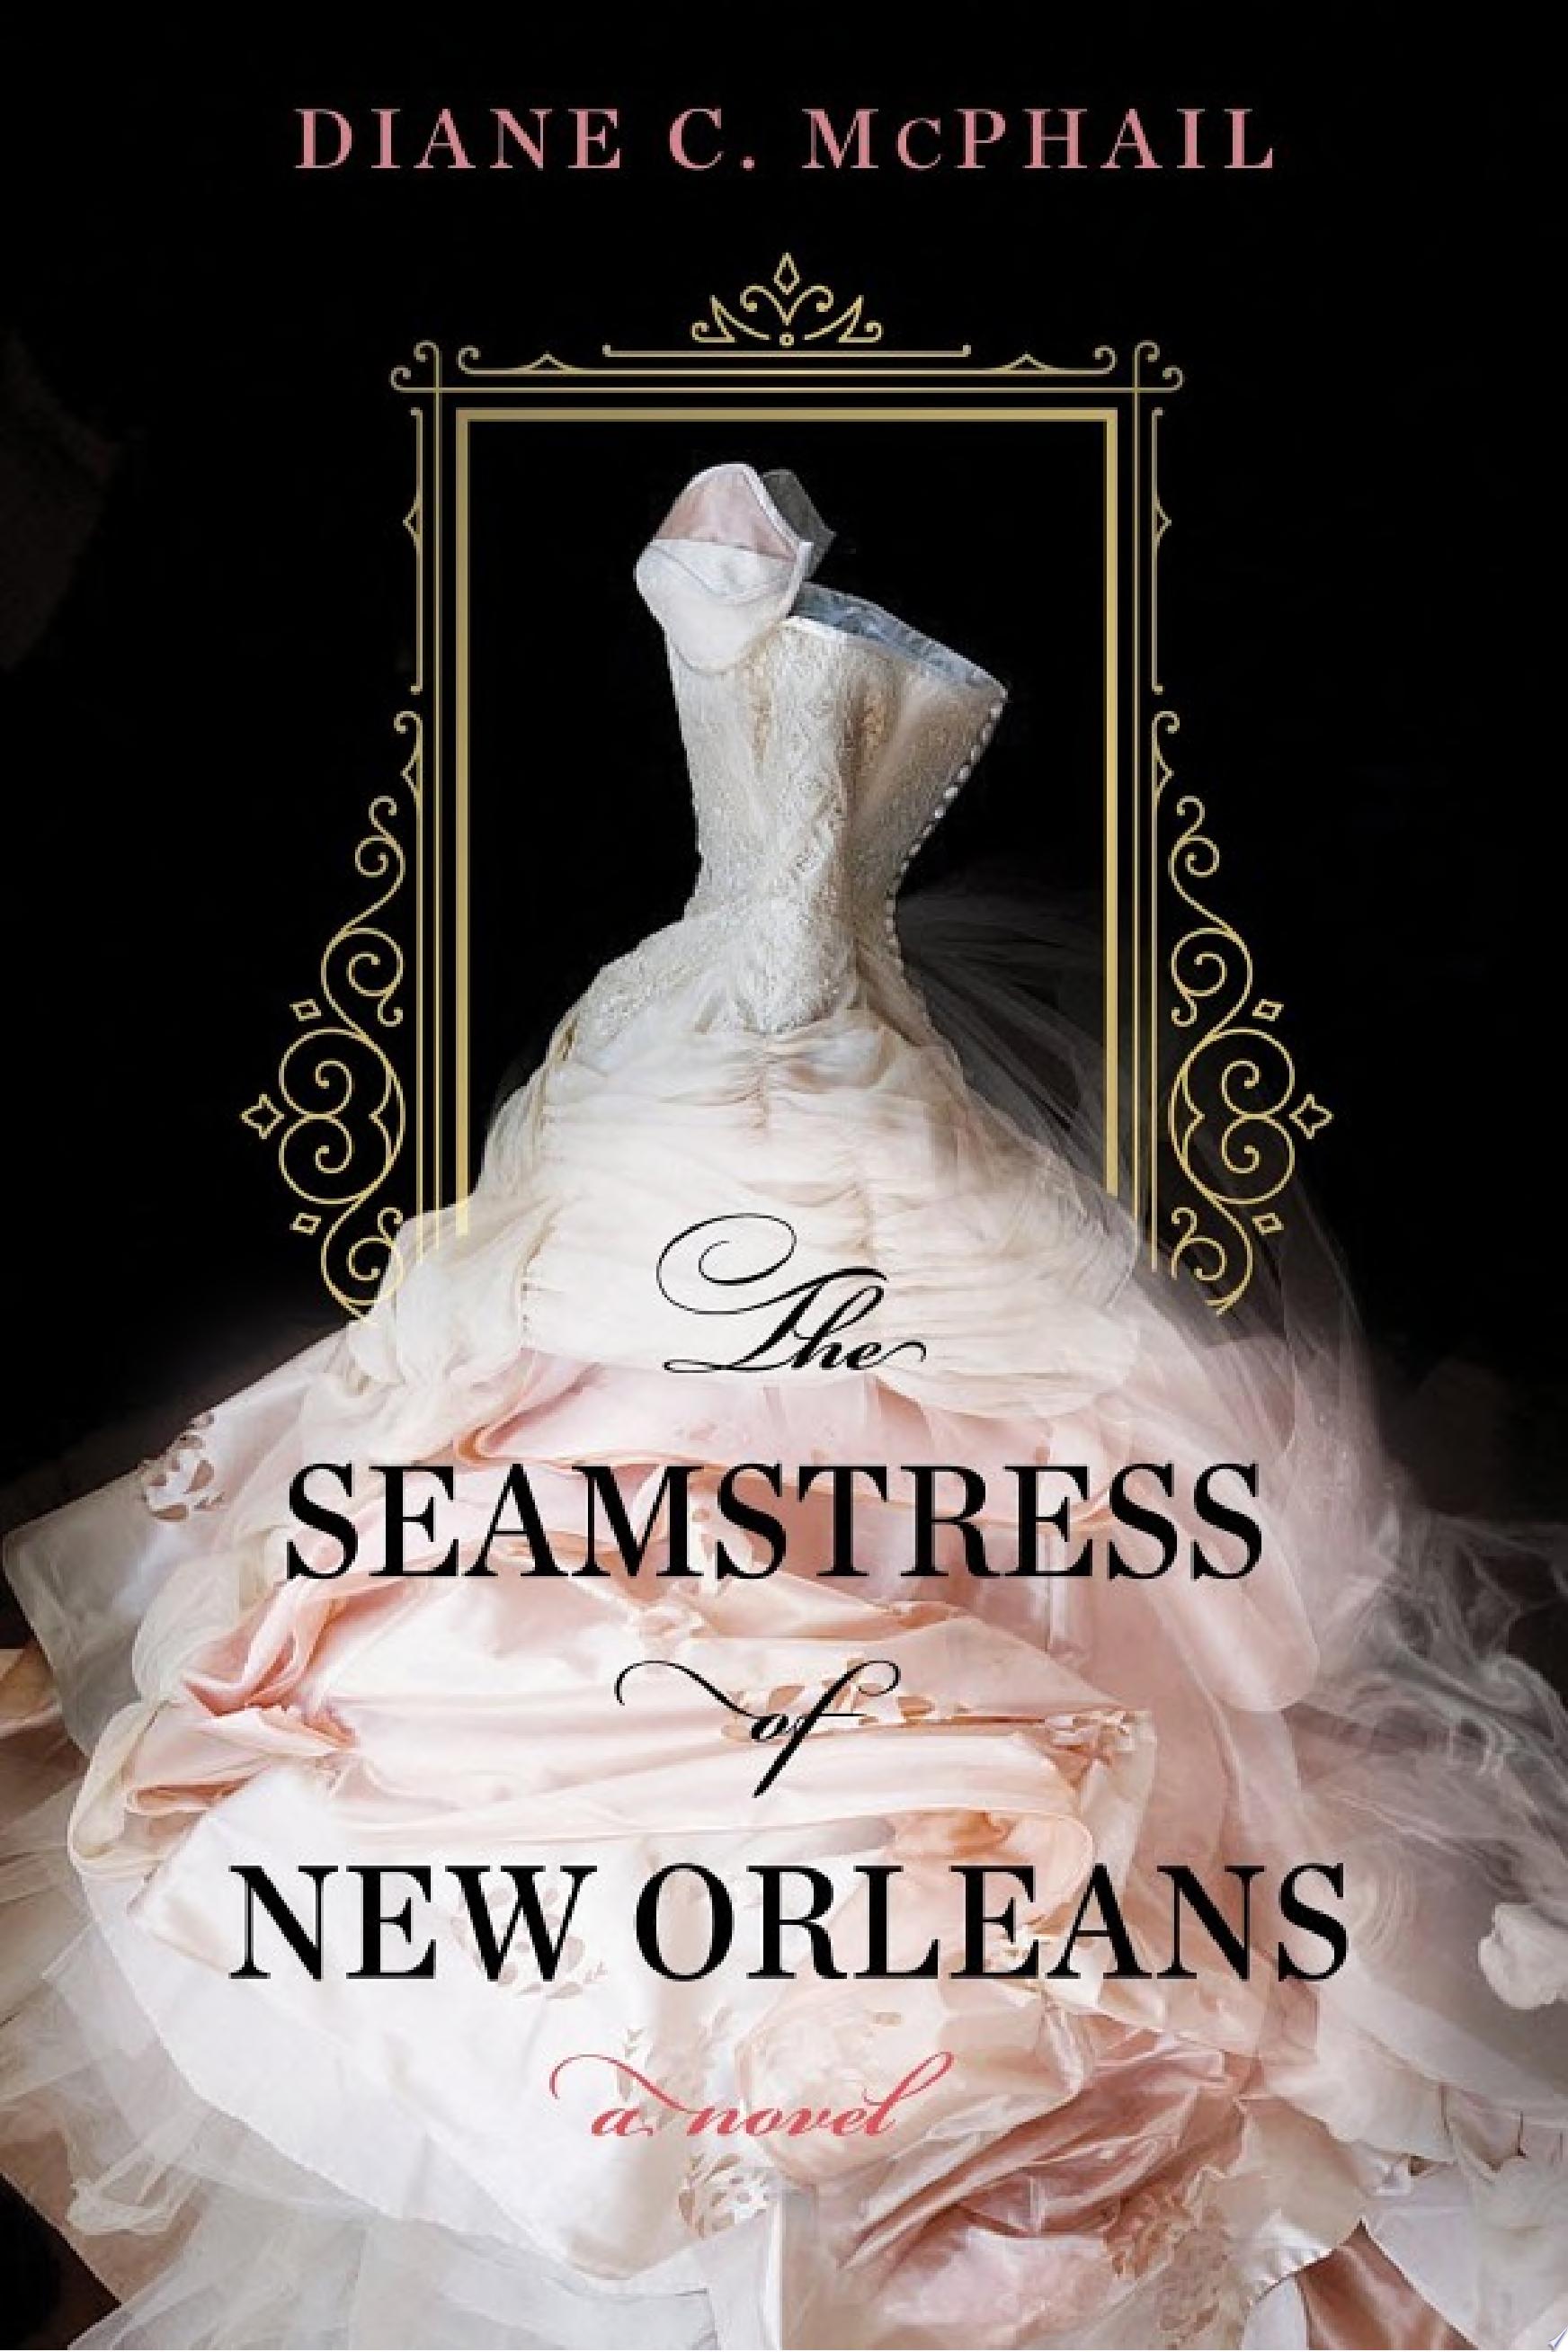 Image for "The Seamstress of New Orleans"